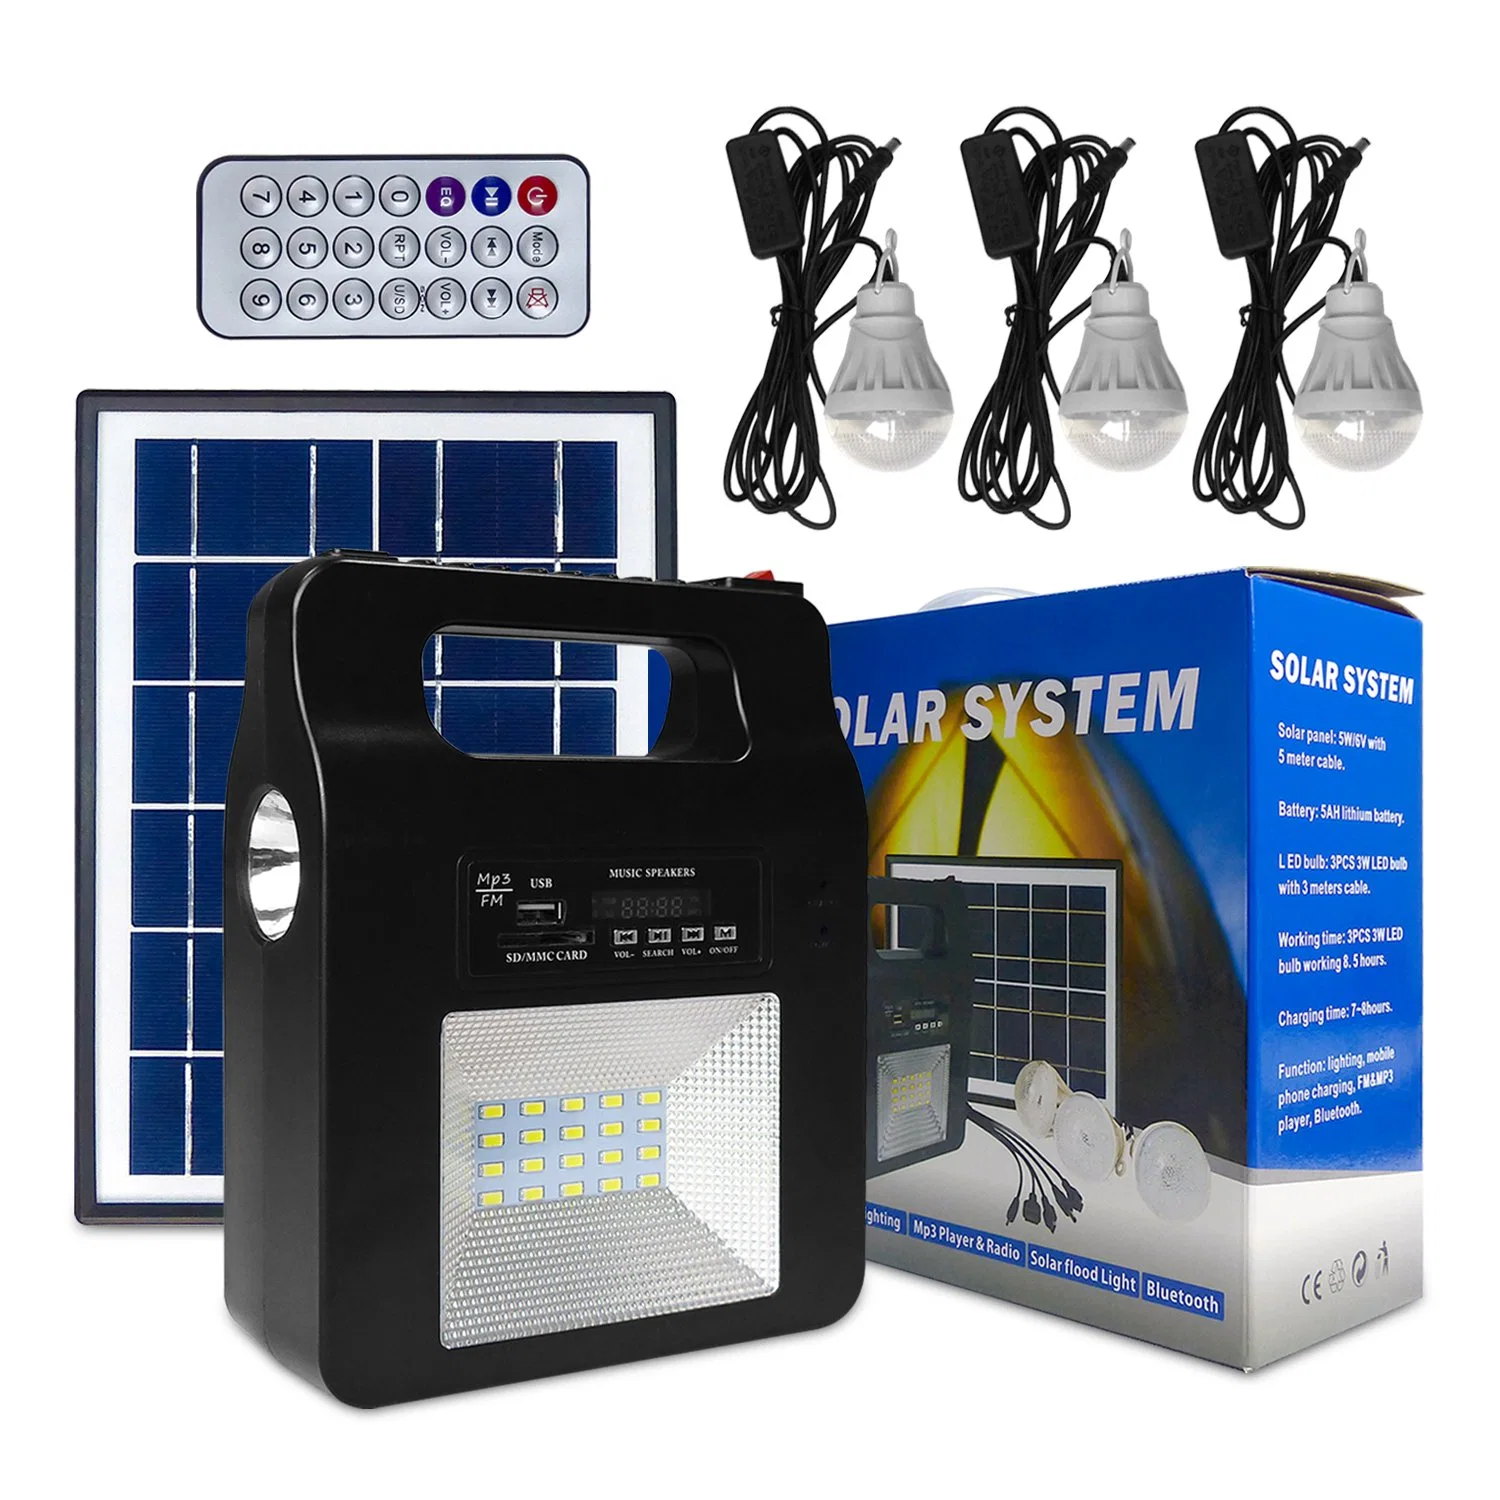 Small Portable Remote Control Solar Panel Powered Lighting System for Home Flashlight Solar Radio with Bulb Light